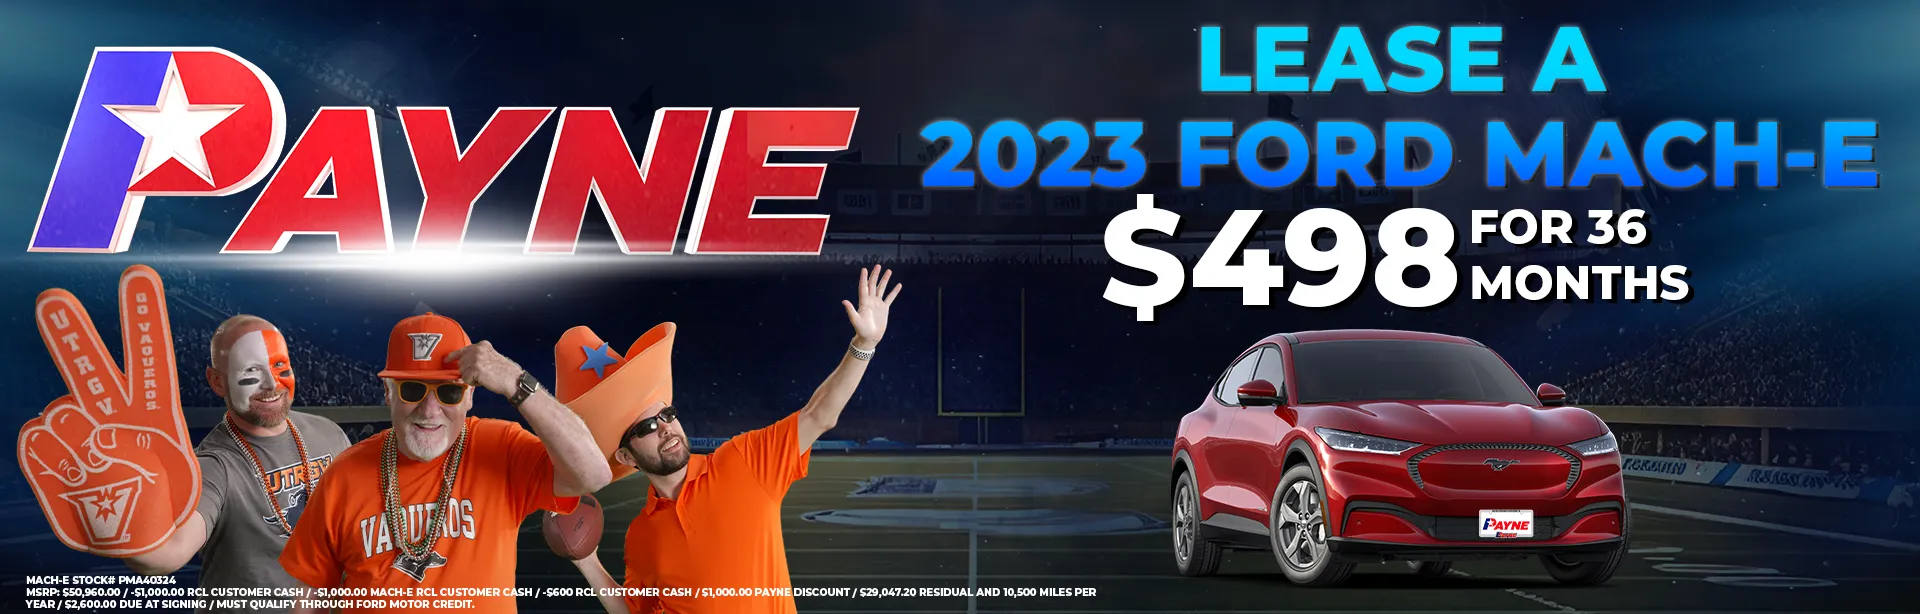 Lease a 2023 Ford Mustang MachE for $498 a month for 36 months 